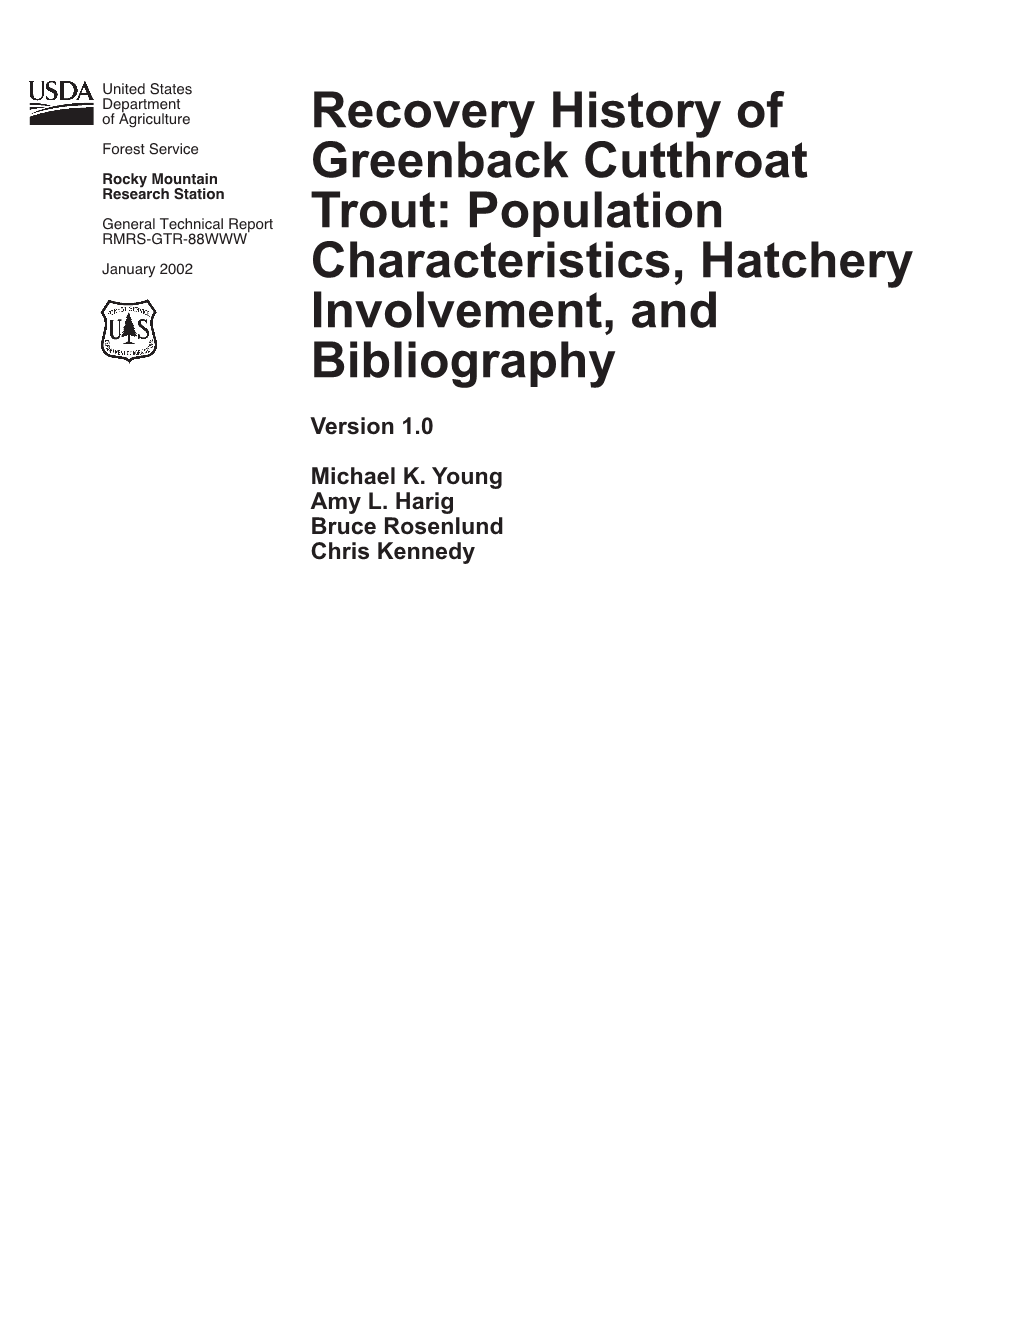 Recovery History of Greenback Cutthroat Trout: Population Characteristics, Hatchery Involvement, and Bibliography, Version 1.0